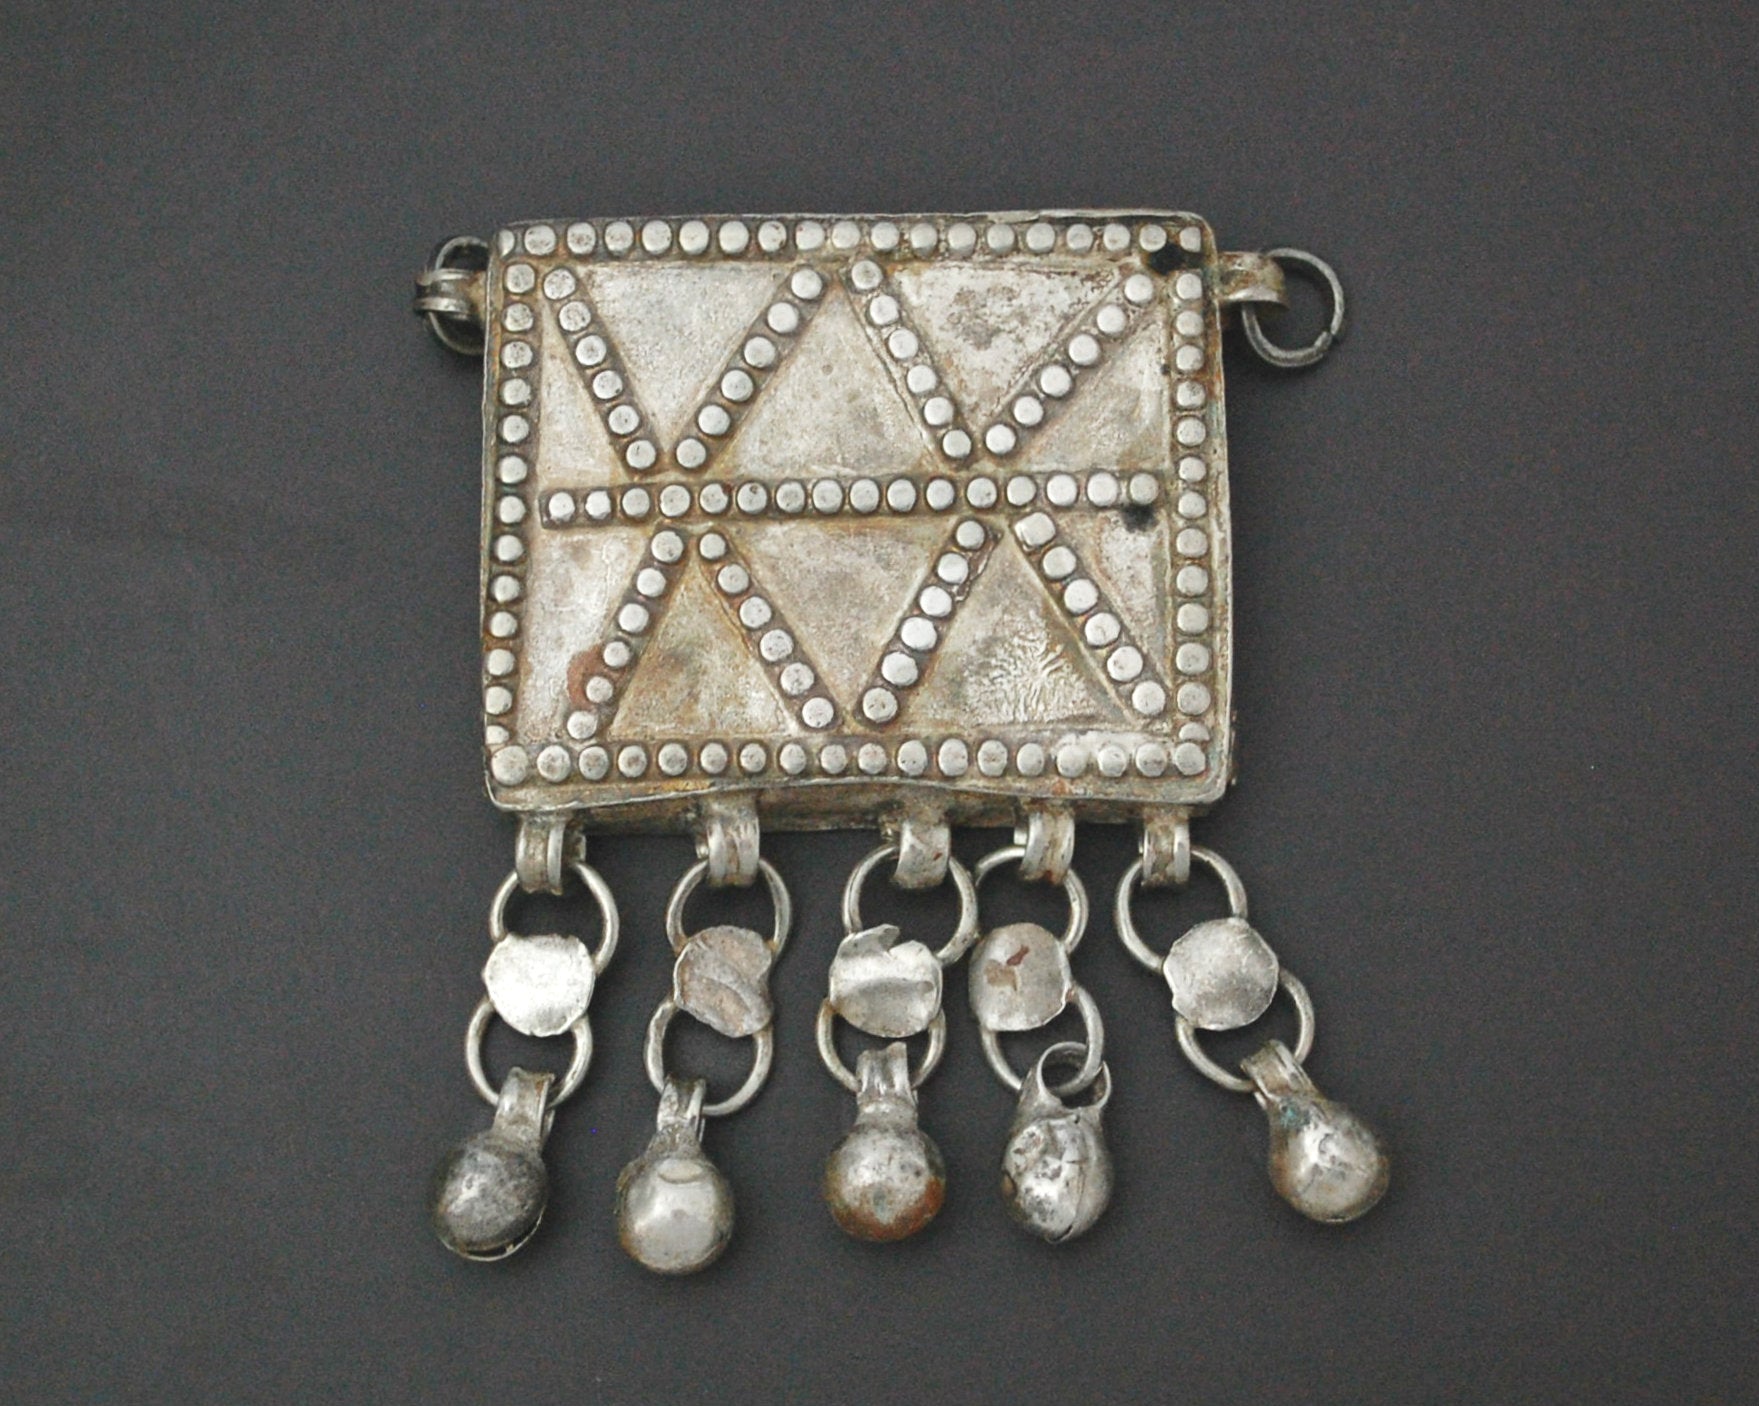 Bedouin Egyptian Zar Amulet Pendant Box with Bells